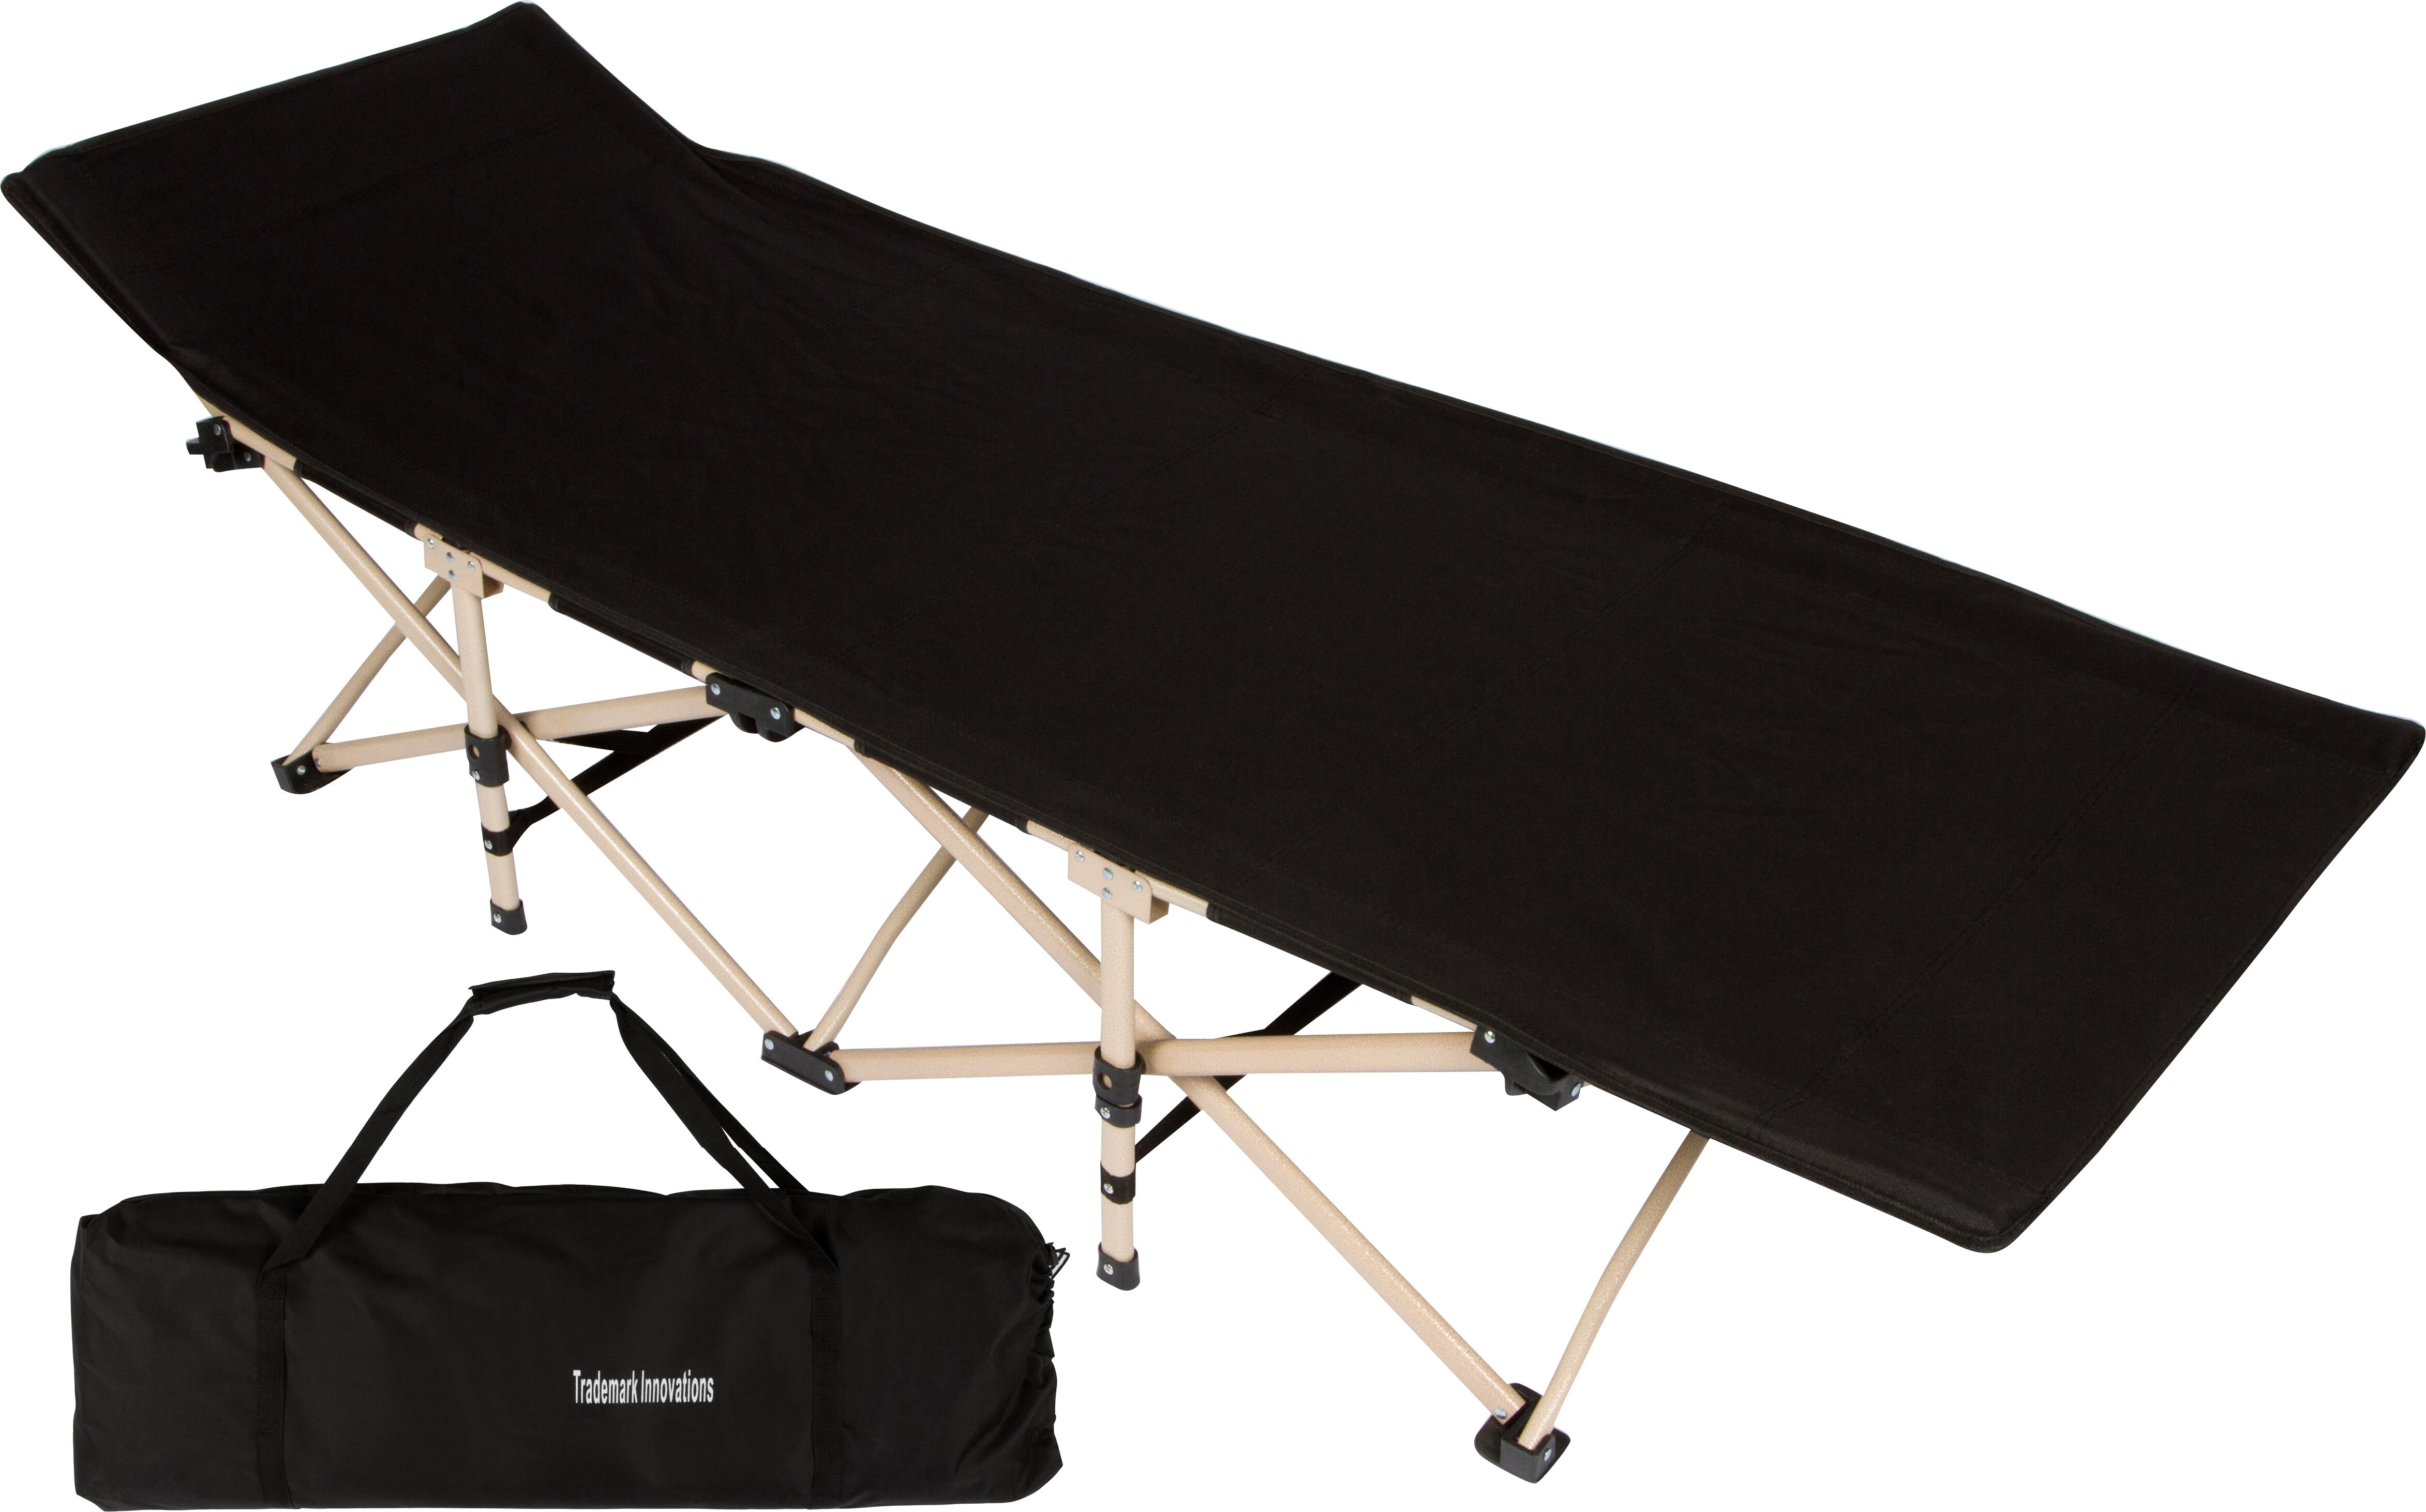 stackable camping cots